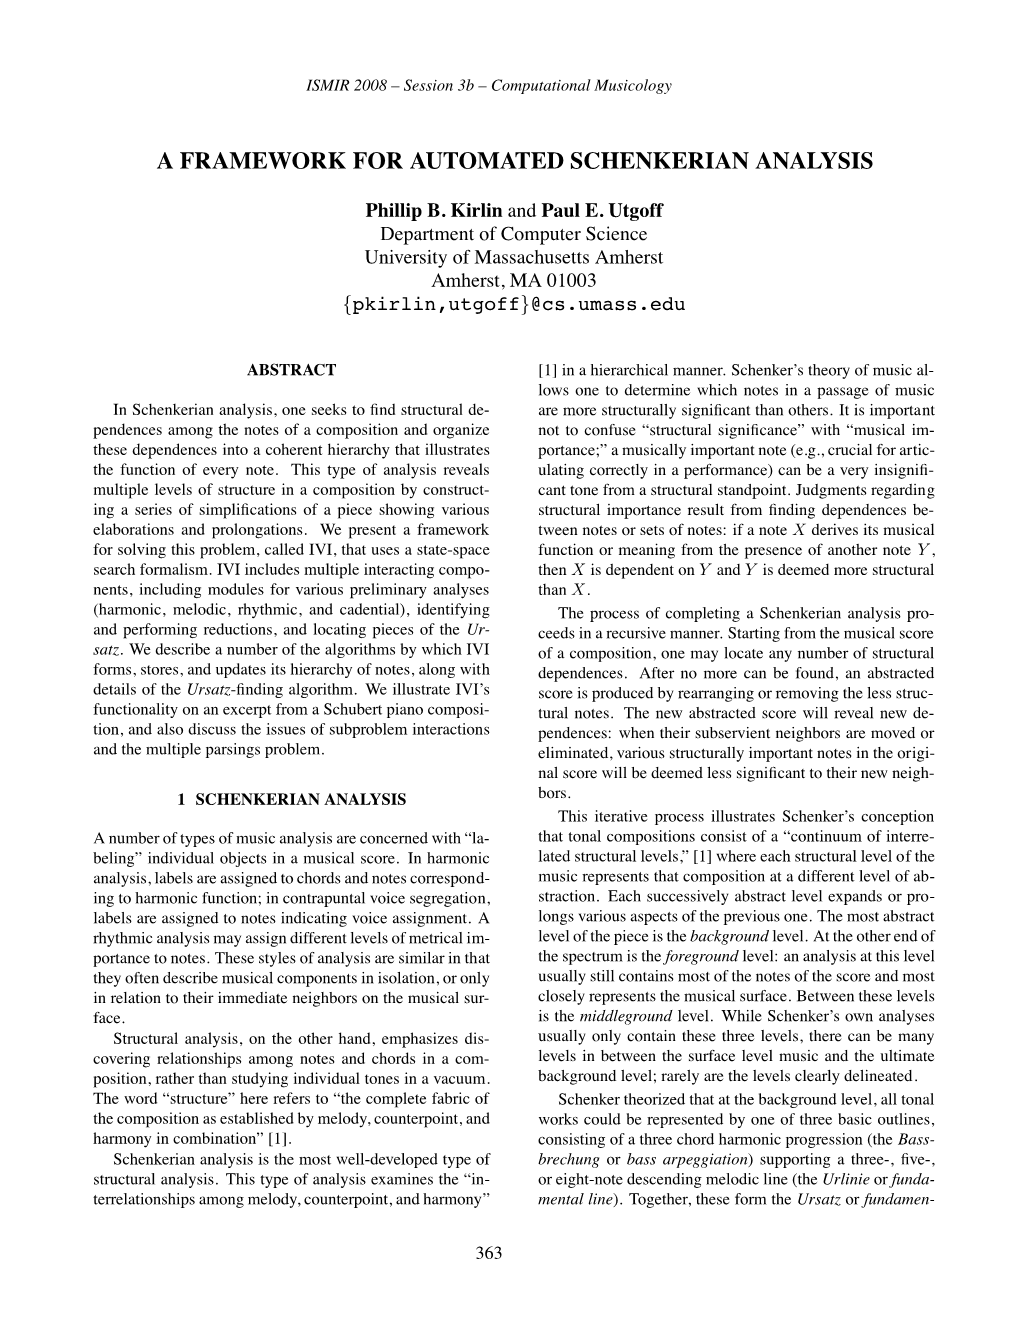 A Framework for Automated Schenkerian Analysis